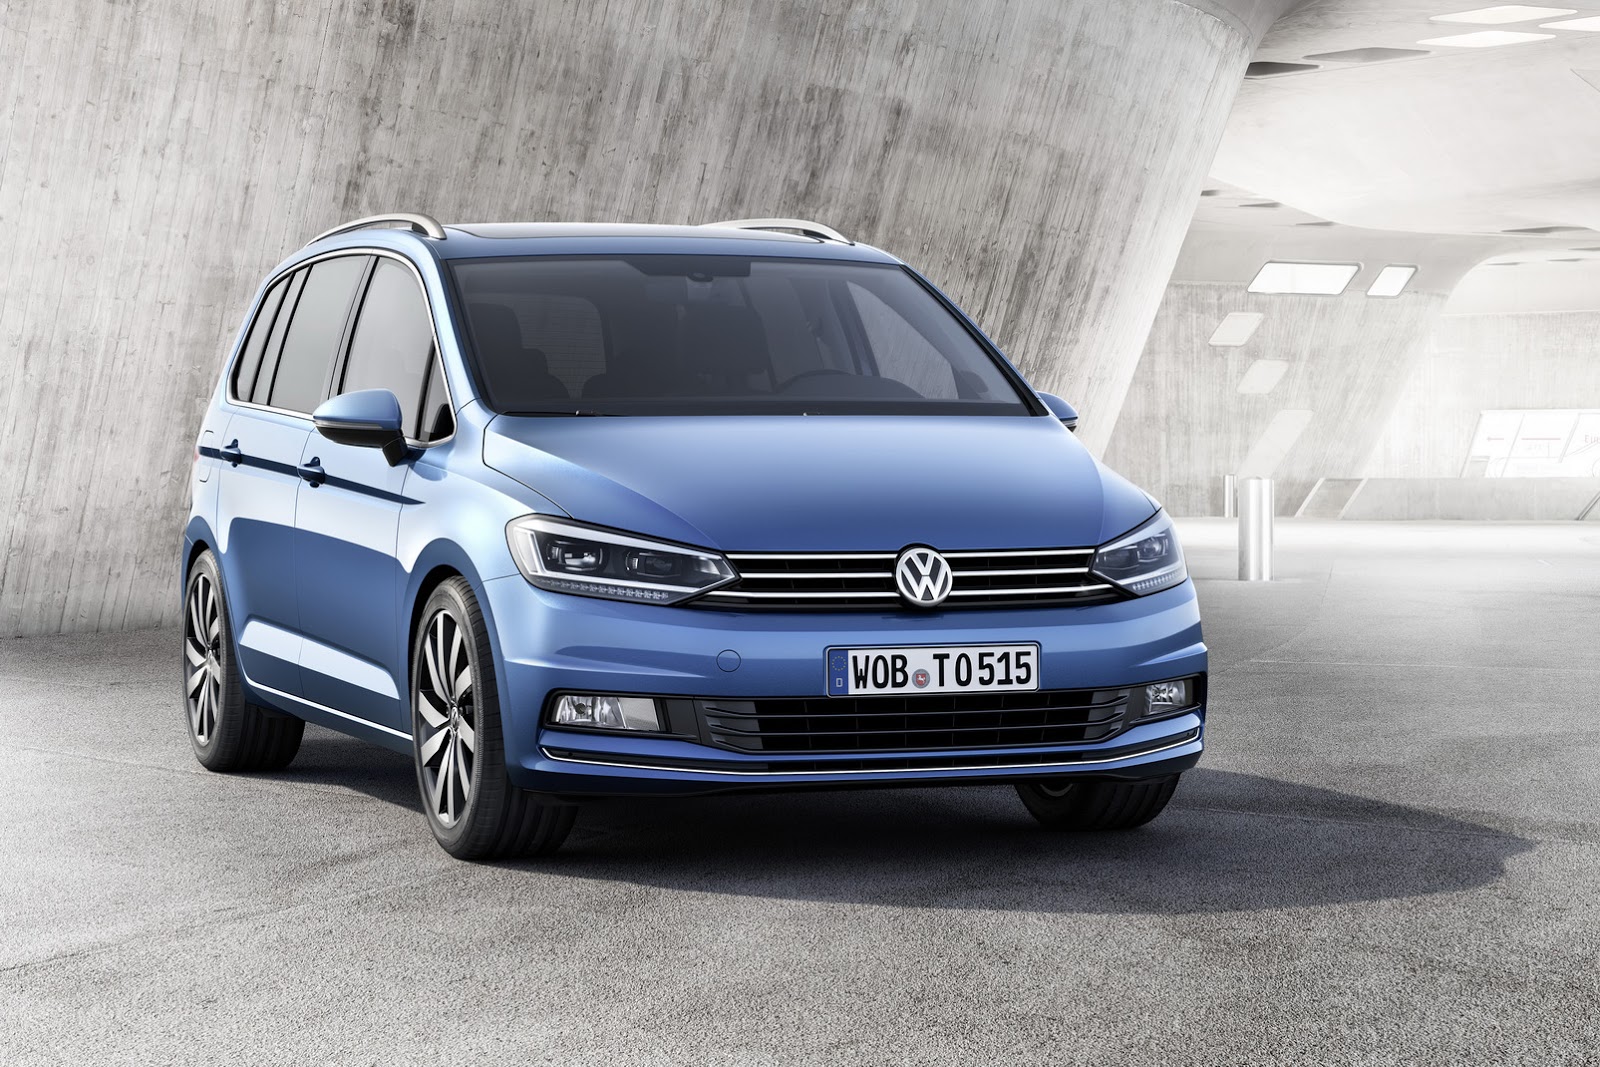 It's Official: All-New VW Touran Based On MQB Platform [w/Video]